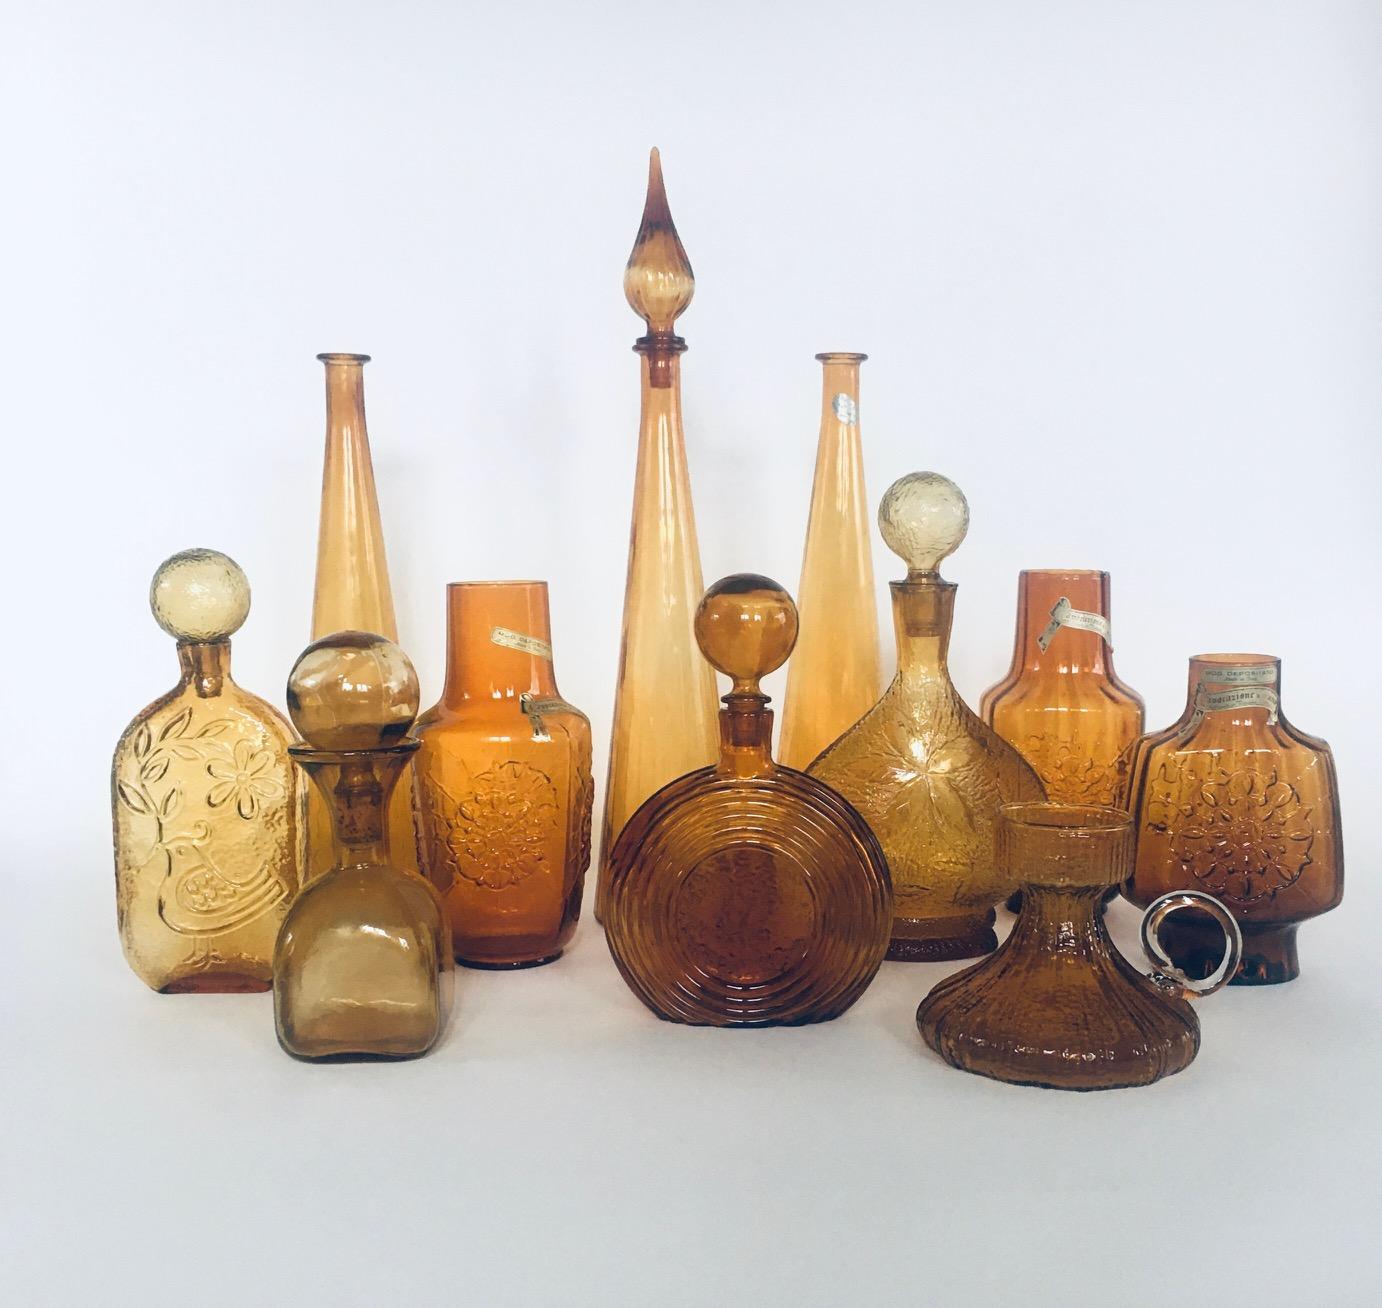 Collection of vintage Amber color Glass Vases & Decanters. All are made in the 1960's era. Italy, France & Scandinavia made. Empoli and other design glass. Set of 11 different pieces. All are in amber color glass different tones, shapes and models.